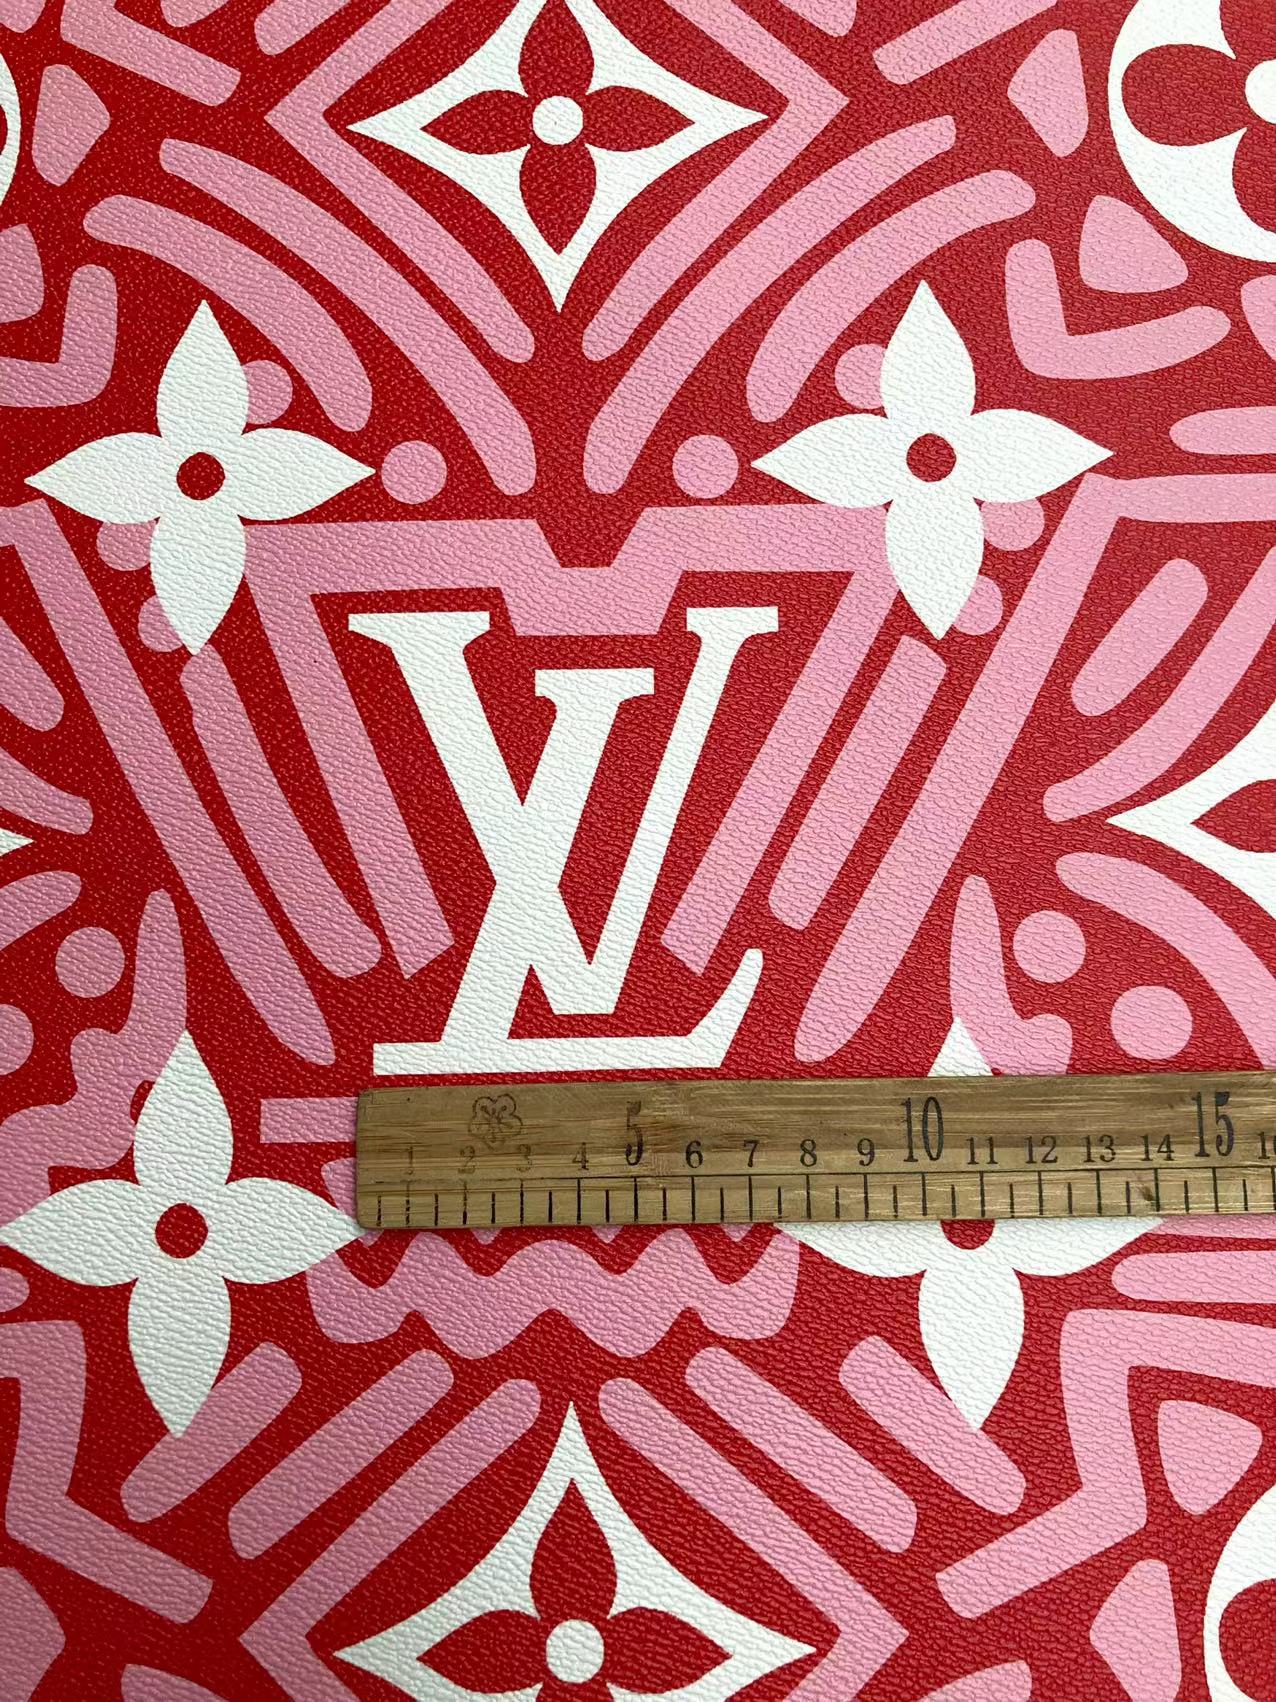 Big Letter Red White LV Leather Material for Custom Handcrafted